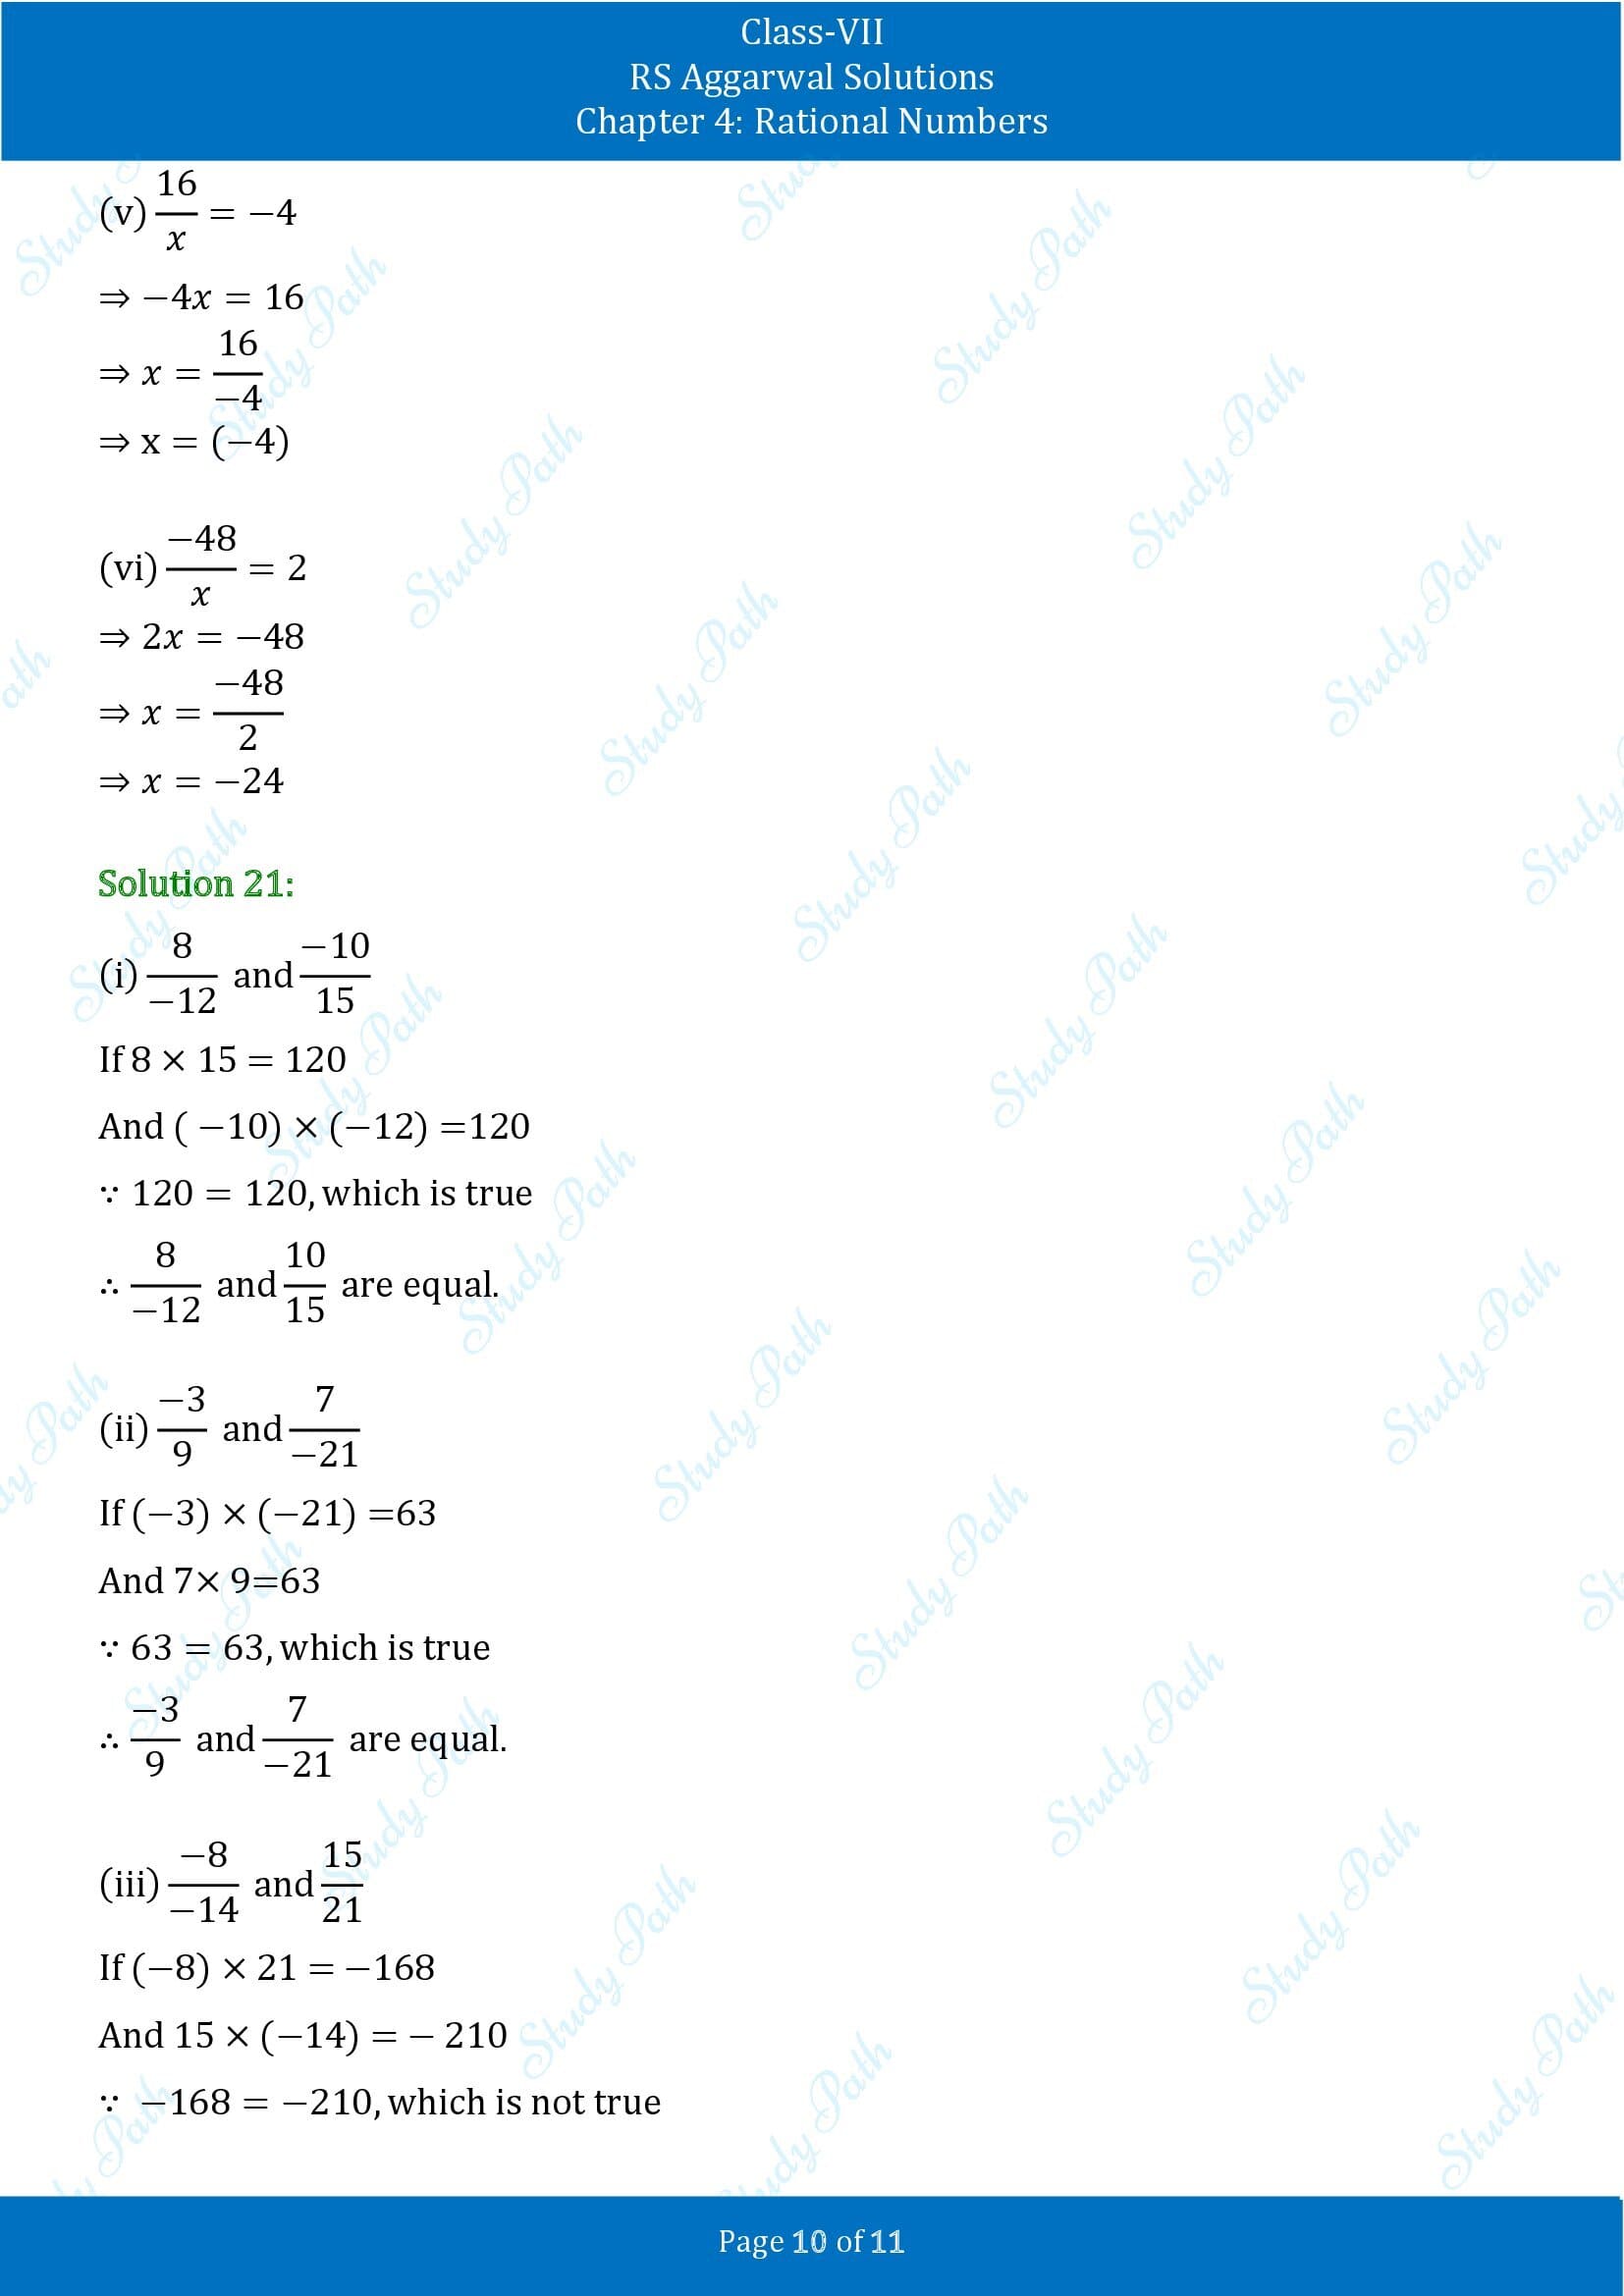 RS Aggarwal Solutions Class 7 Chapter 4 Rational Numbers Exercise 4A 00010